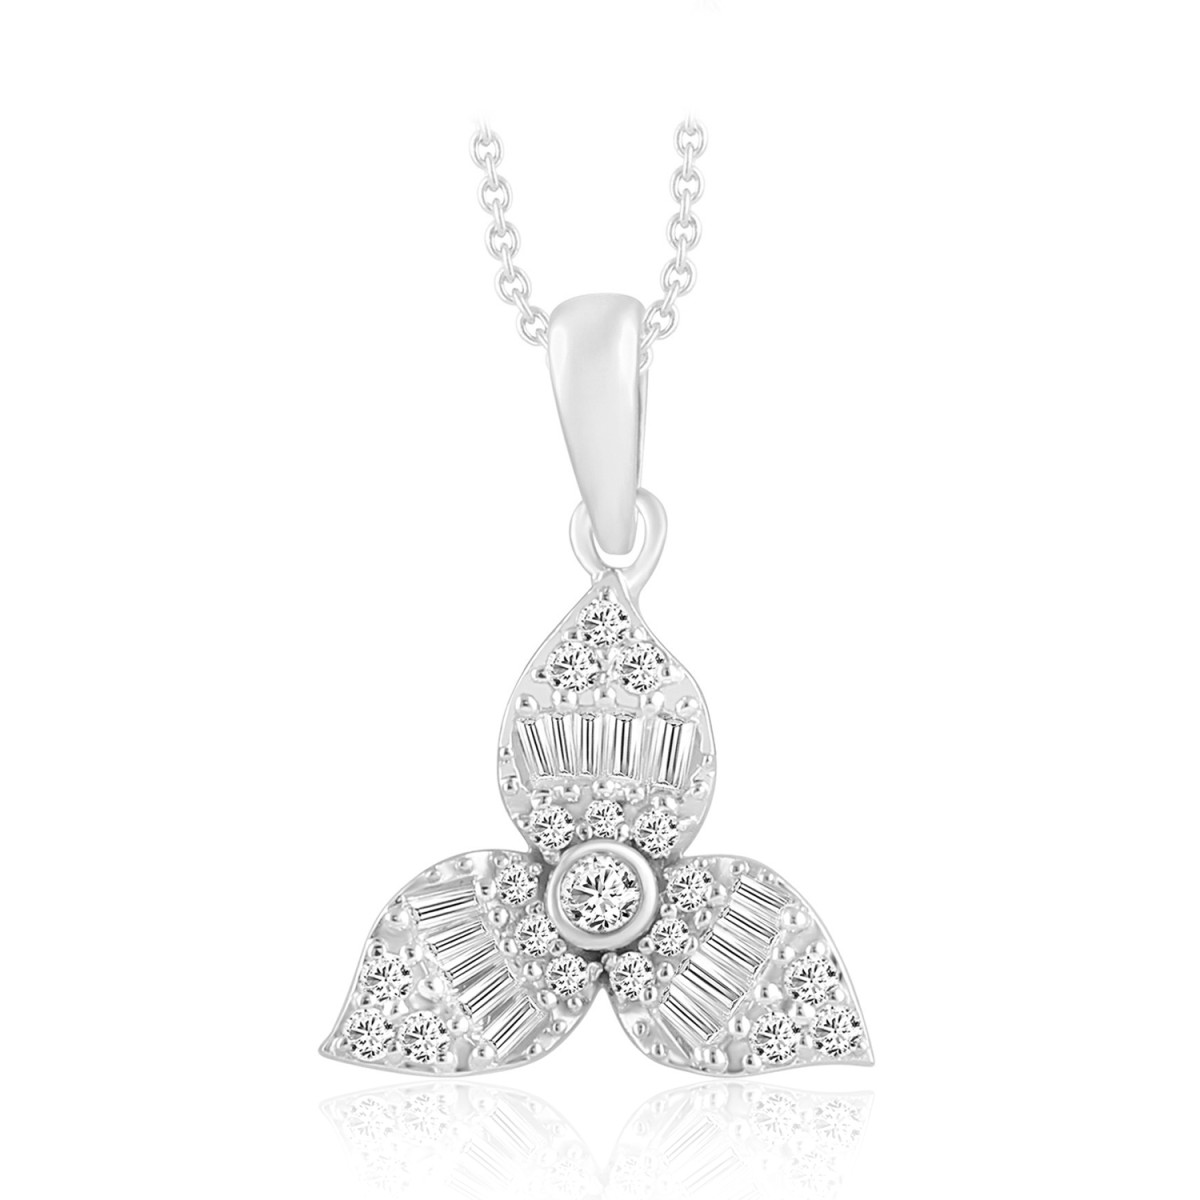 14K WHITE GOLD 1/4CT ROUND/BAGUETTE DIAMOND LADIES PENDANT WITH CHAIN 